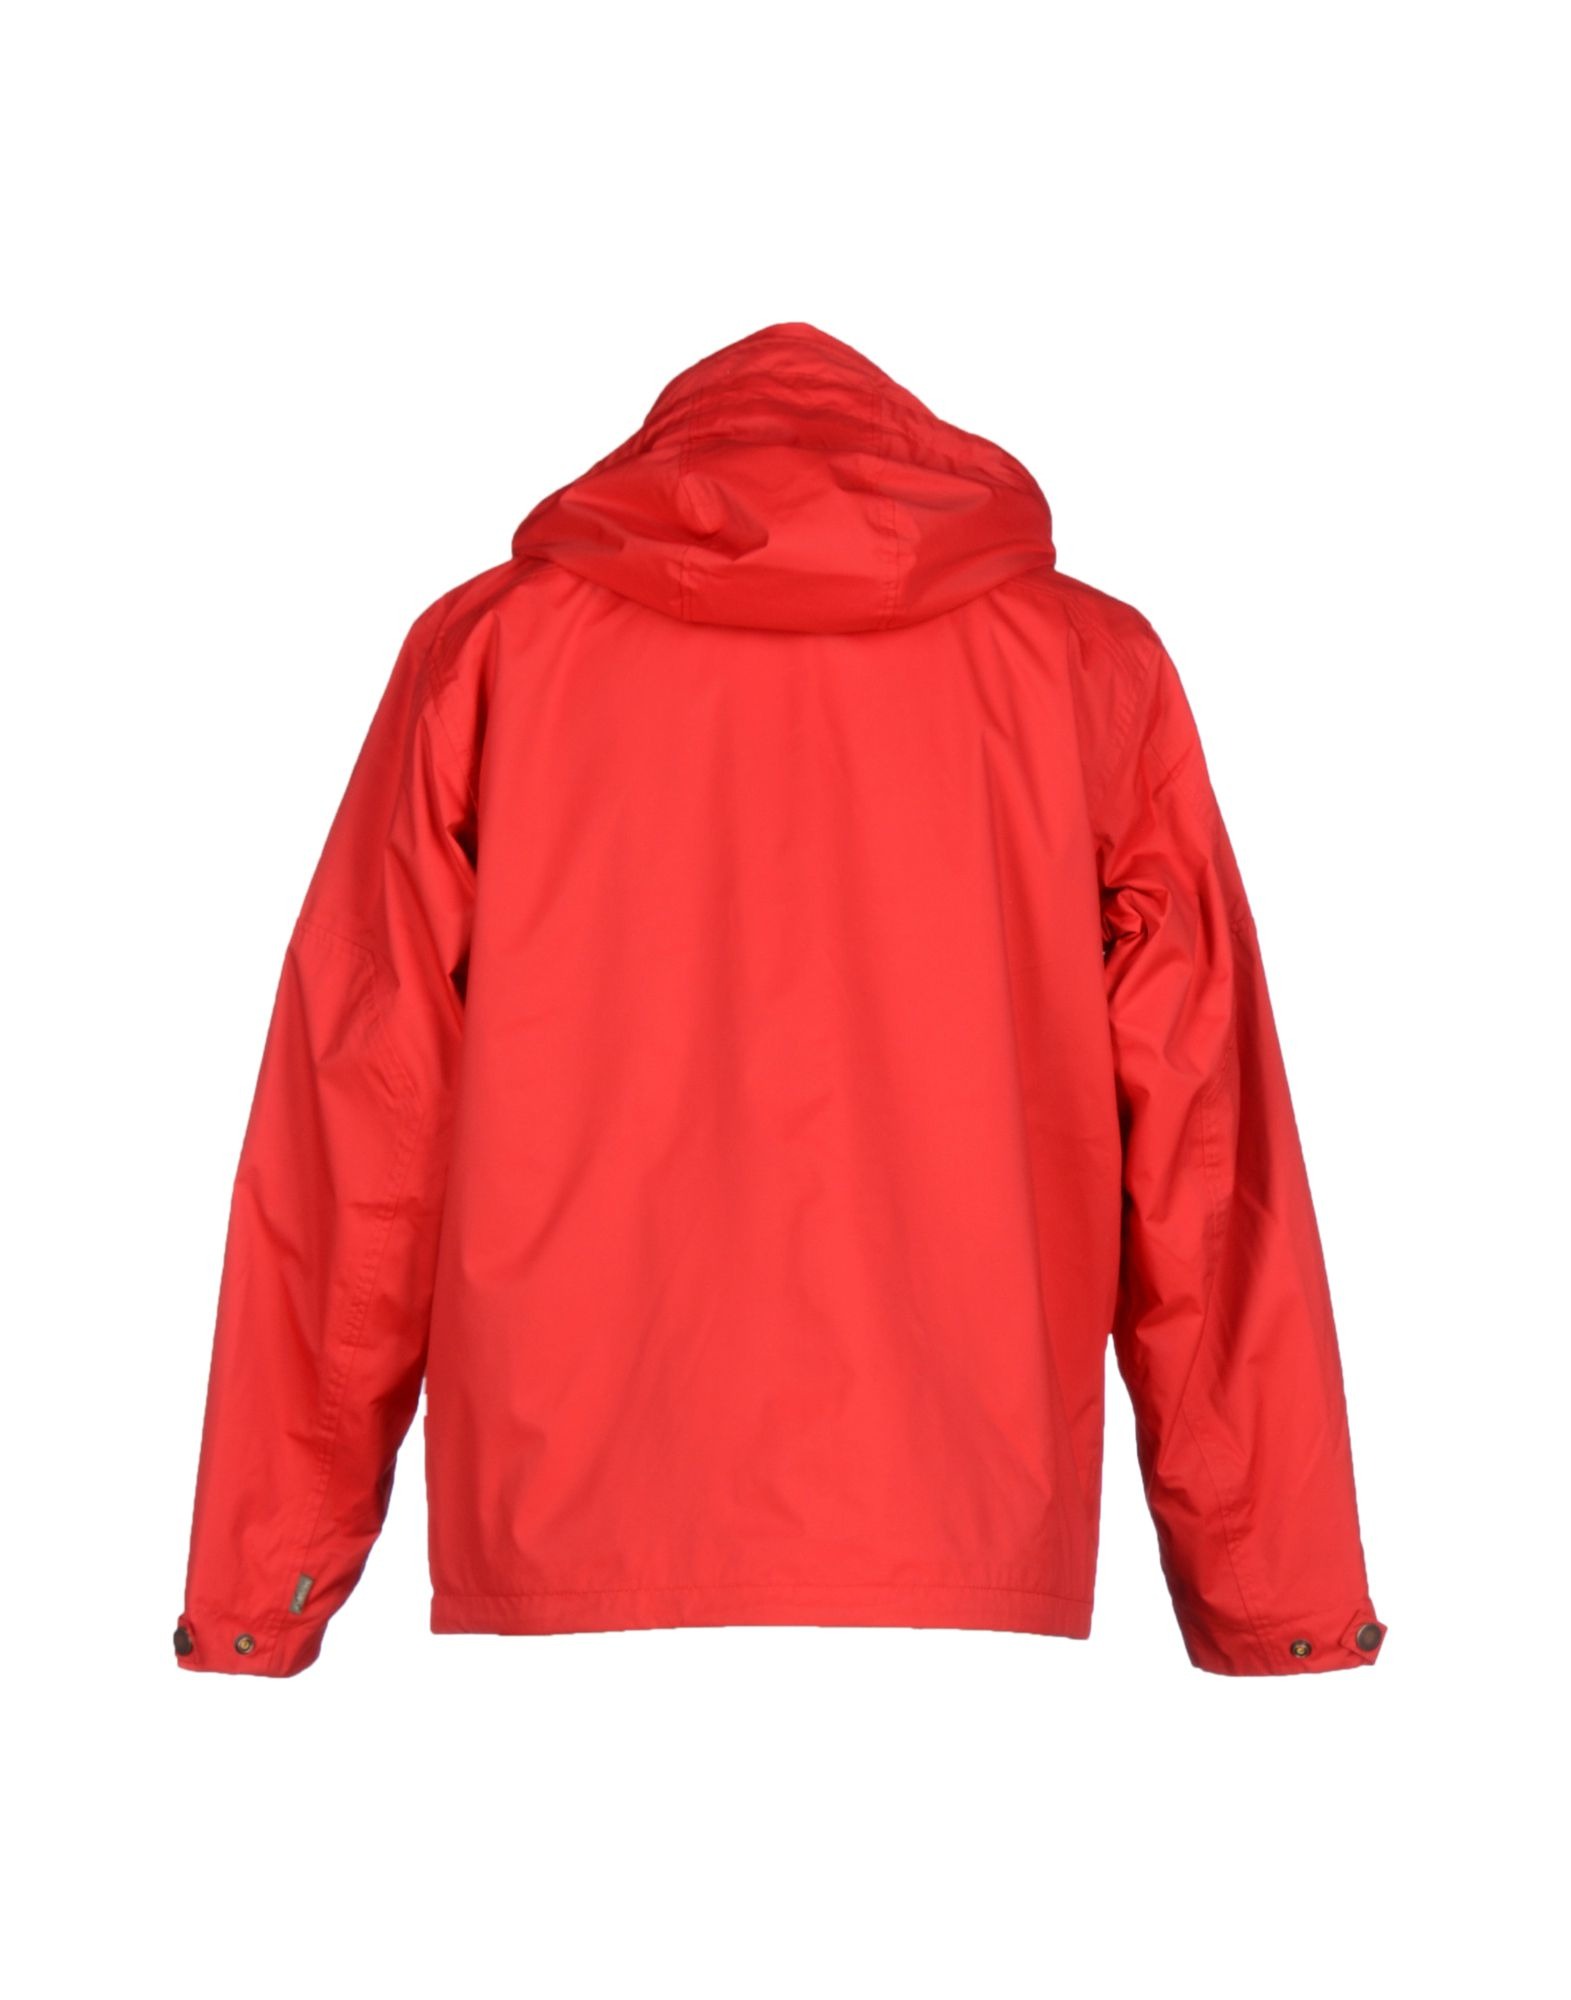 Timberland Synthetic Jacket in Red for Men - Lyst